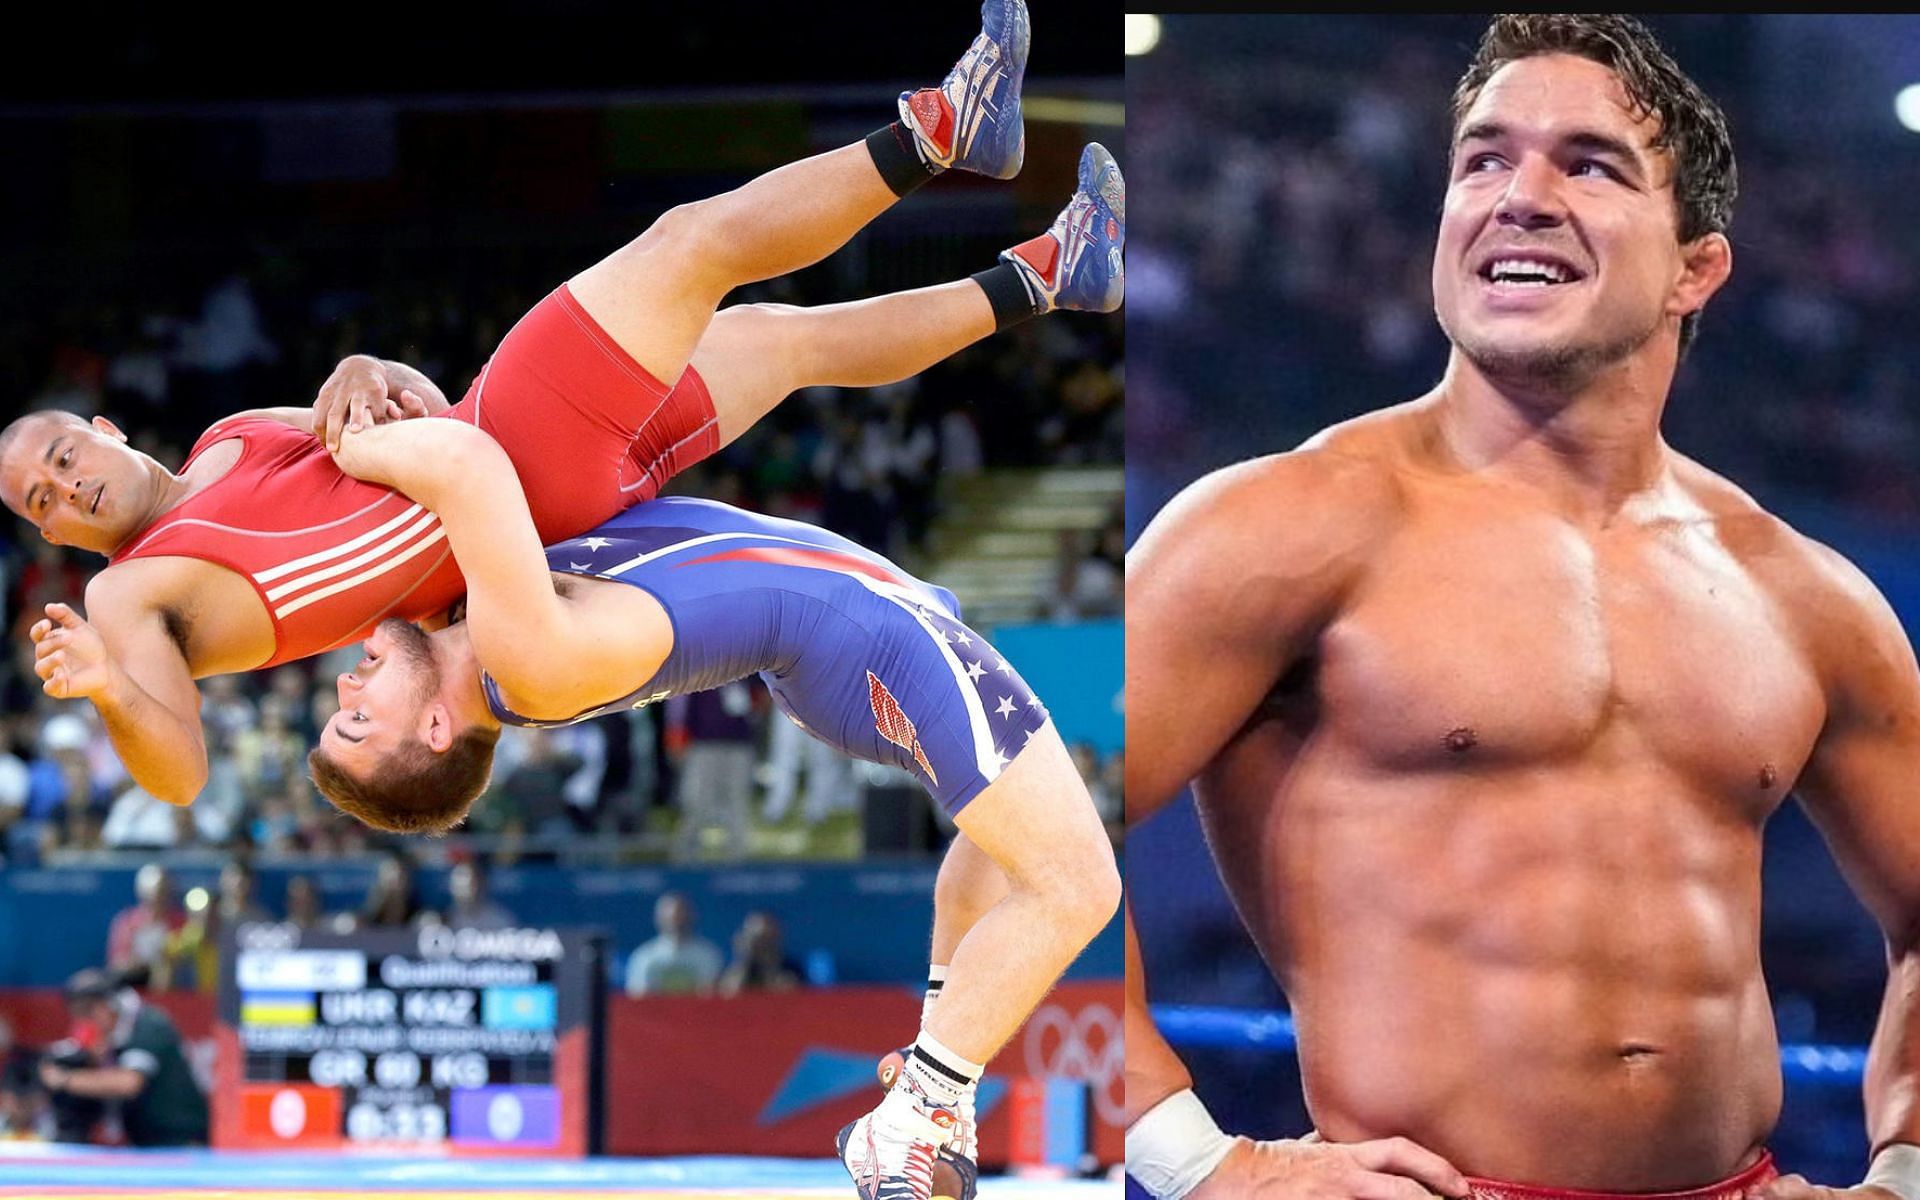 Former Olympic star Chad Gable